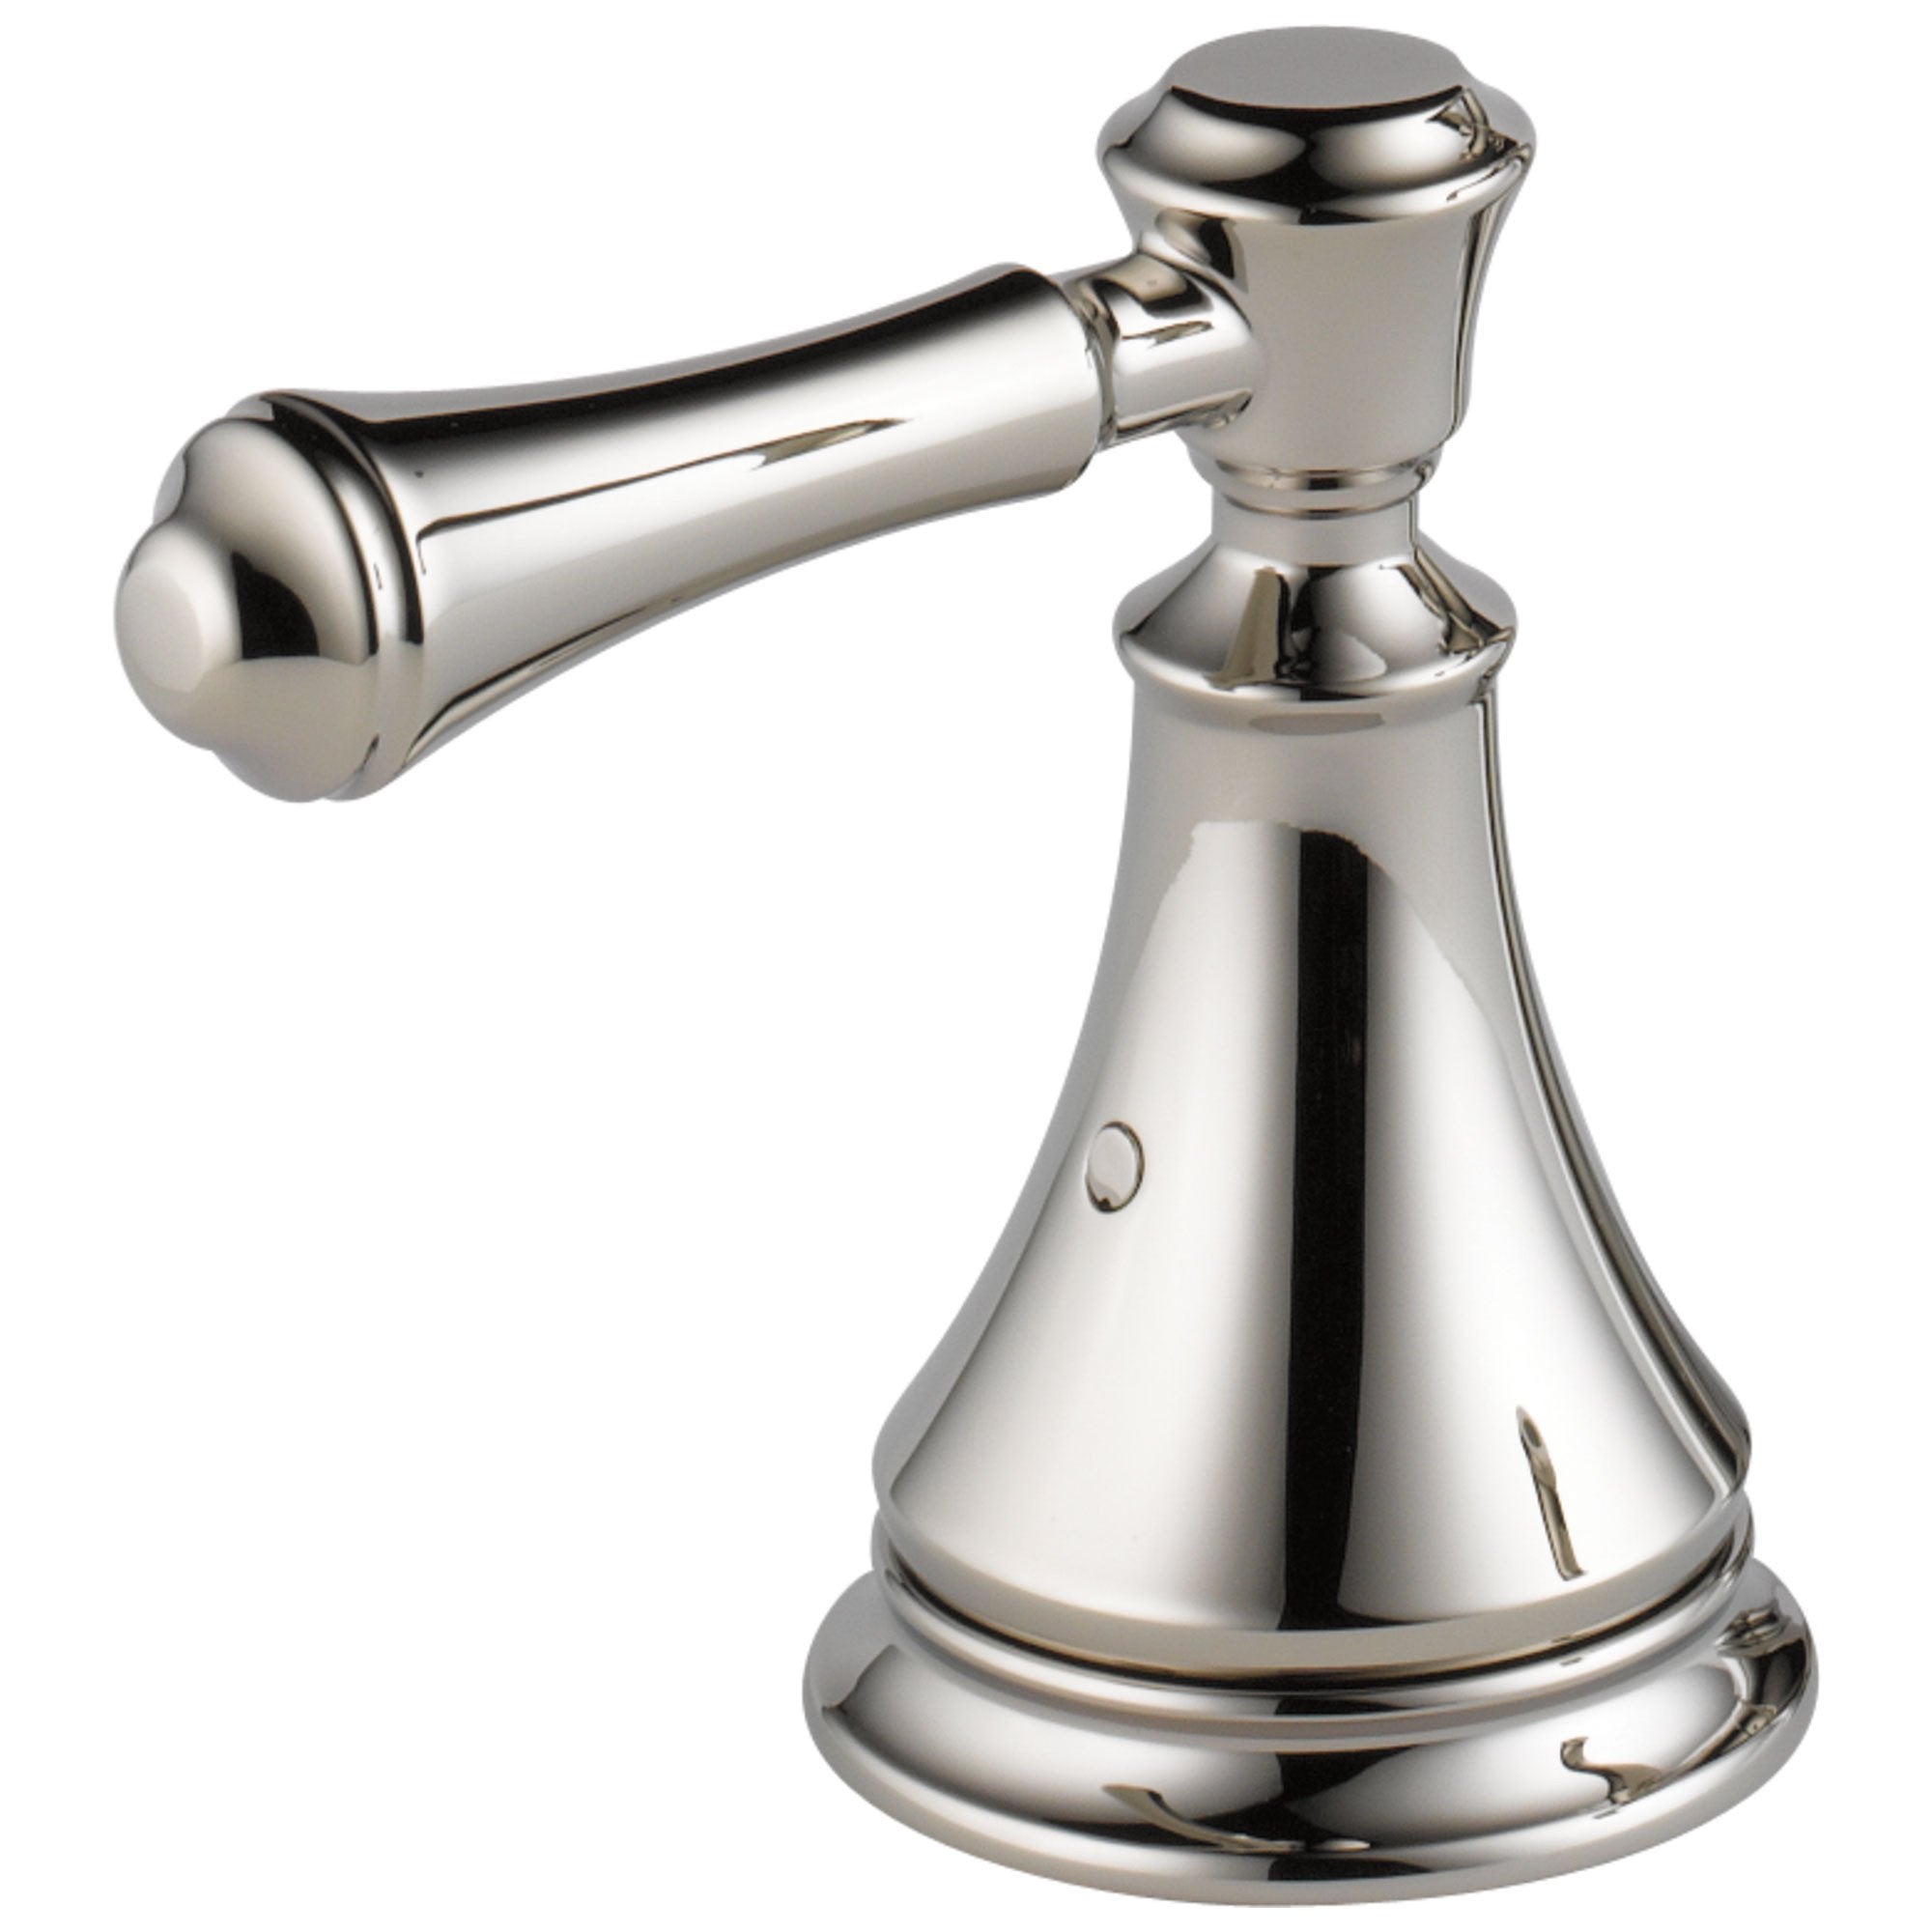 Delta Cassidy Collection Polished Nickel Finish Roman Tub Lever Handles - Quantity 2 Included 579651